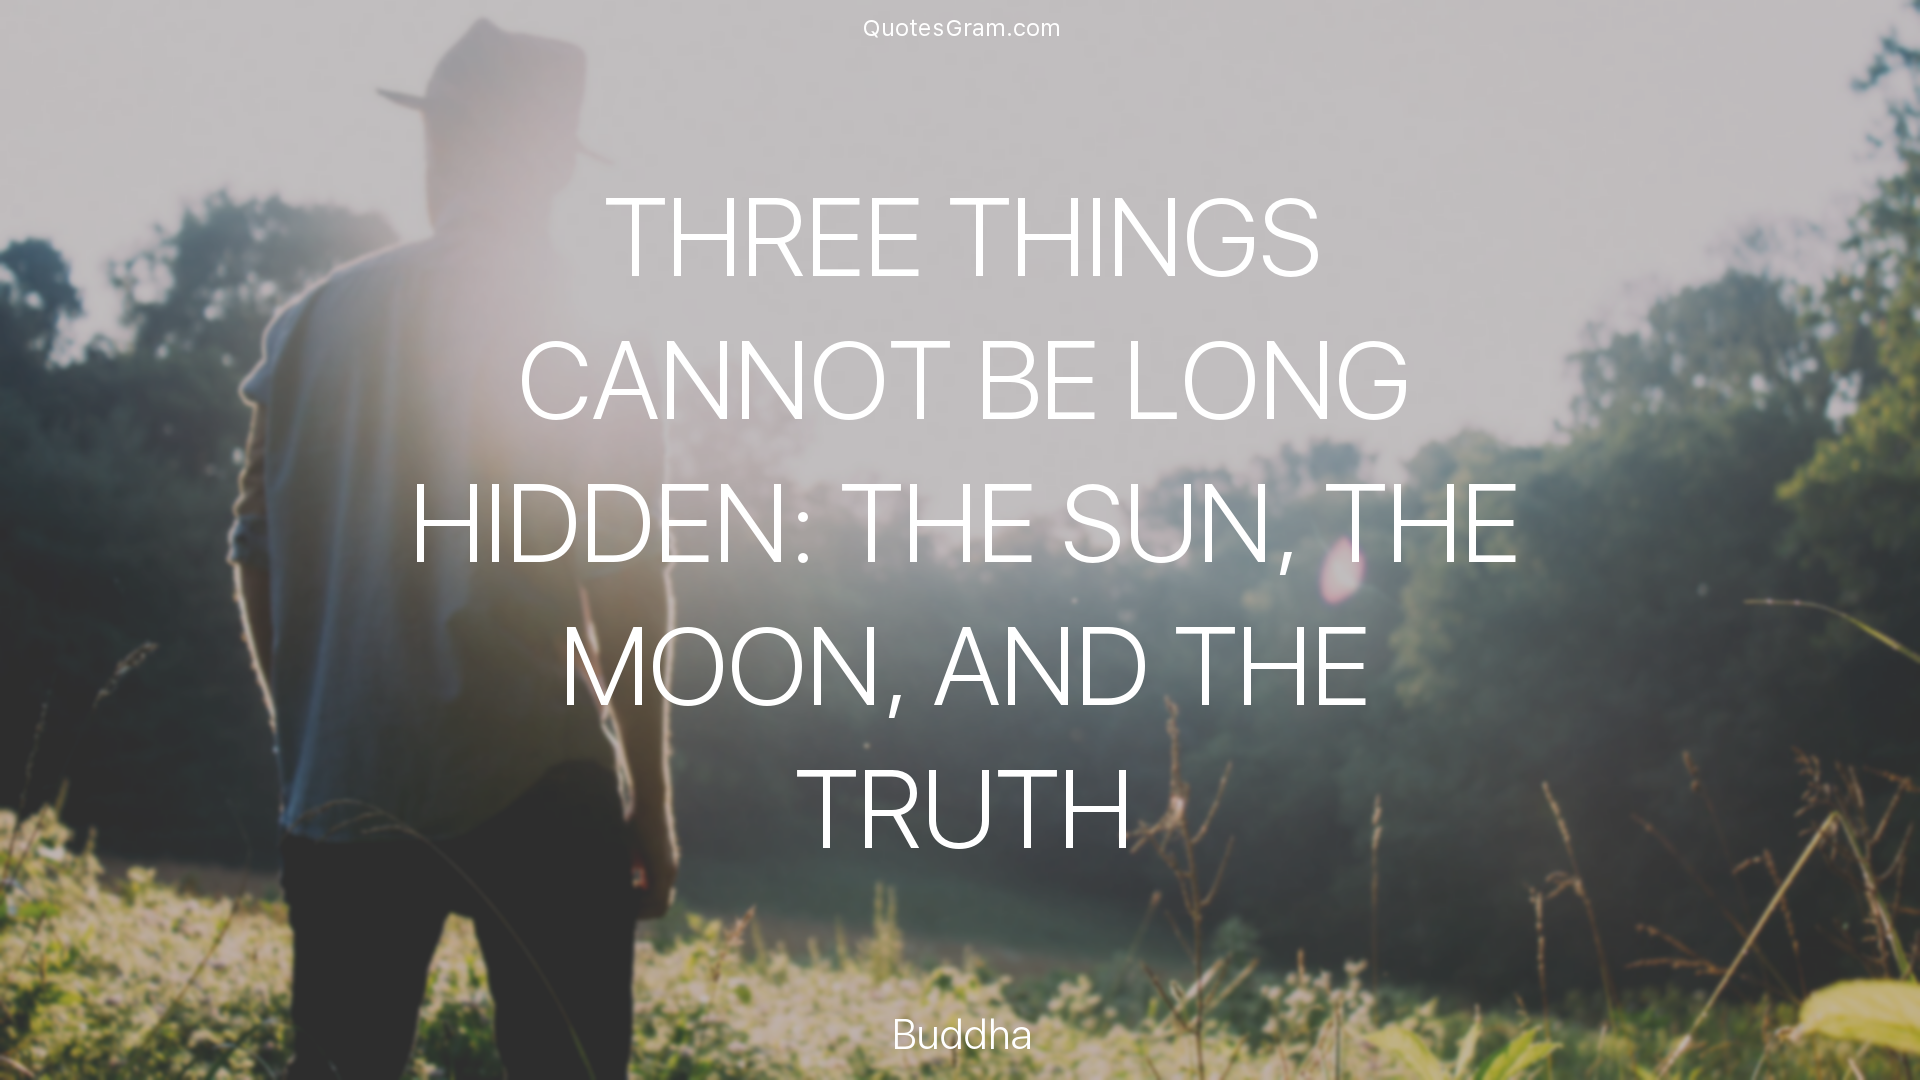 buddha-quote-three-things-cannot-be-long-hidden-the-sun-the-moon.png